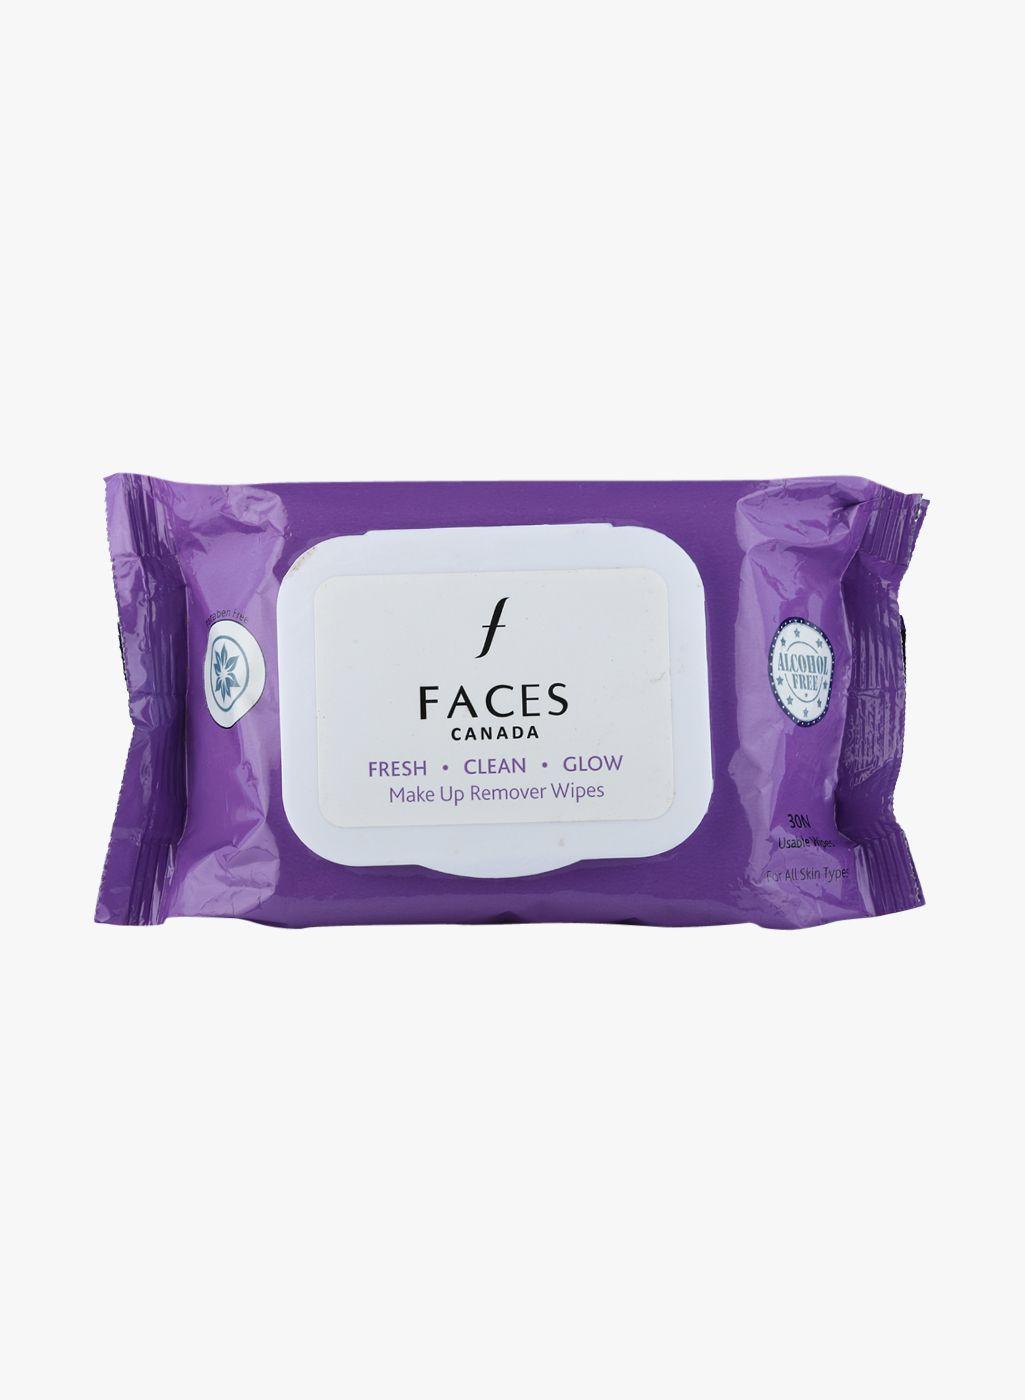 faces-canada-fresh-clean-glow-makeup-remover-wipes-30n